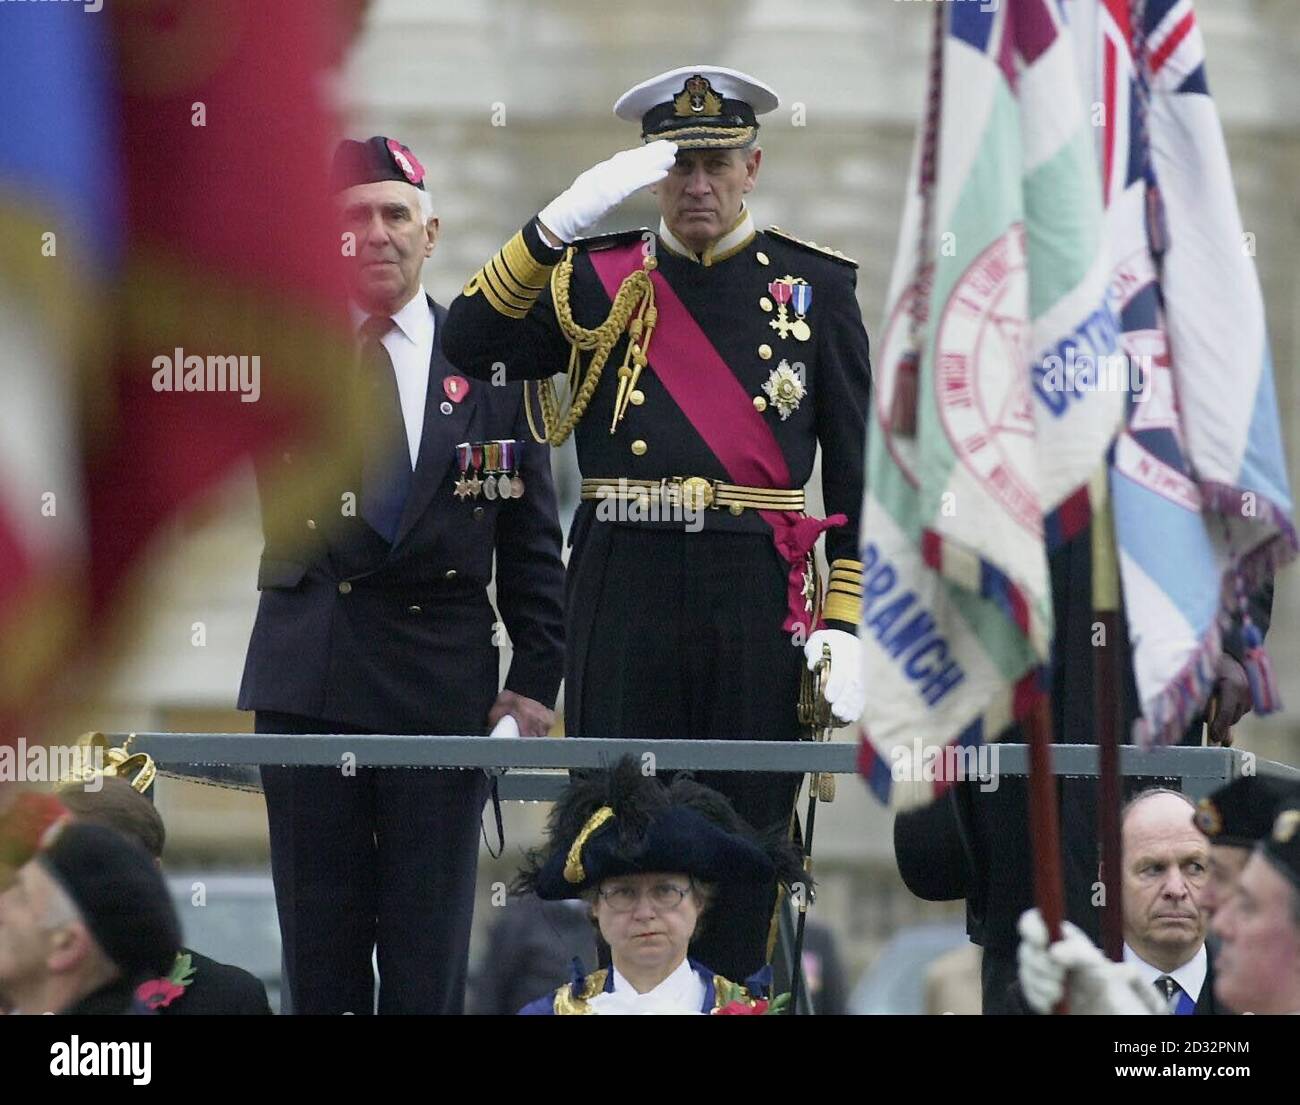 The Chief of the Defence Staff Admiral Sir Michael Boyce takes the salute on Horse Guards after the Remembrance Service by the Association of Jewish ex service me and women at the Cenotaph in London. Stock Photo